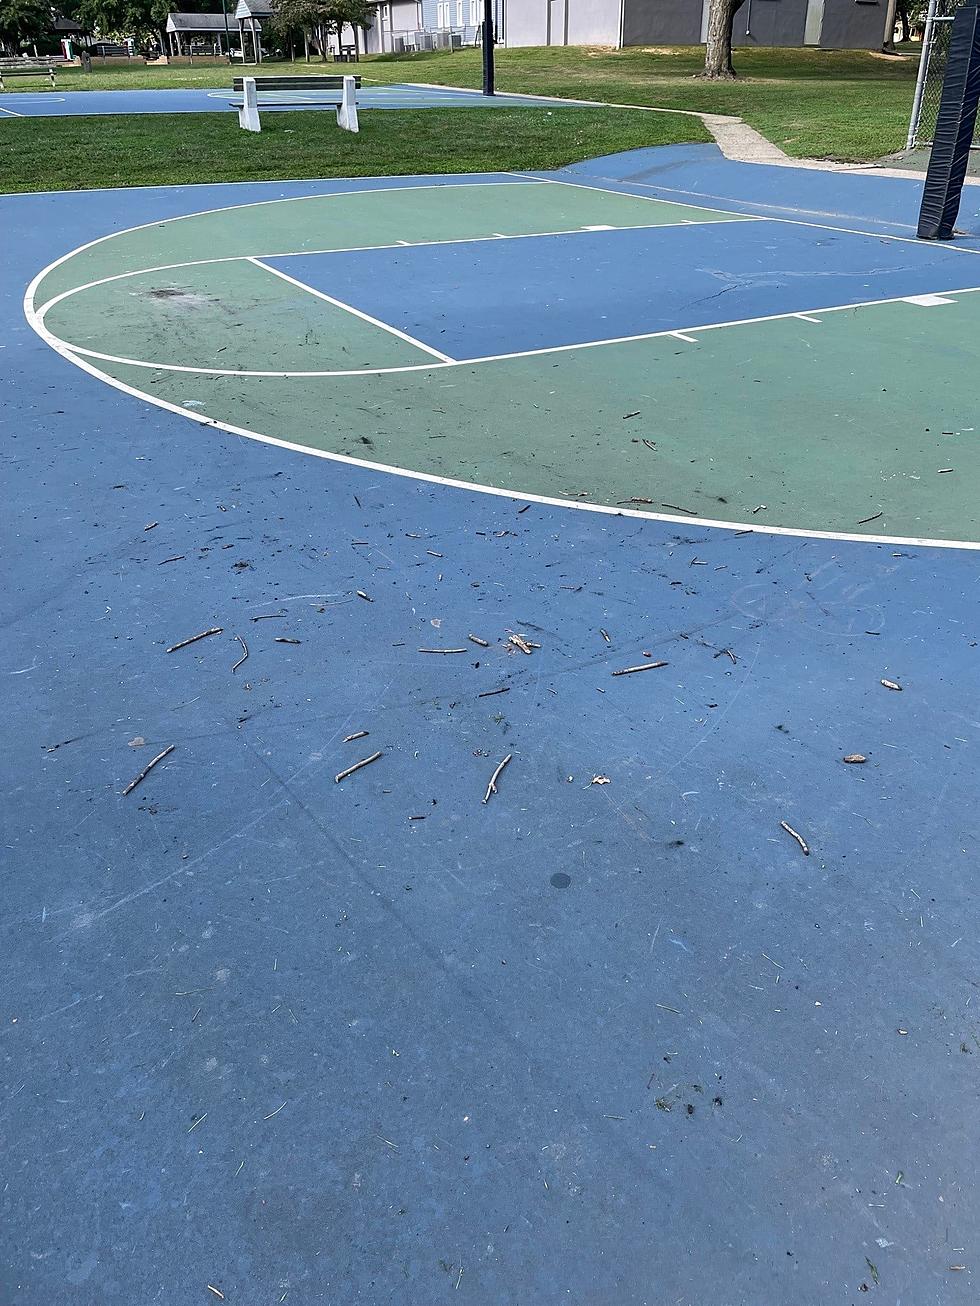 Brielle Police looking for 10 teens who burned basketball courts